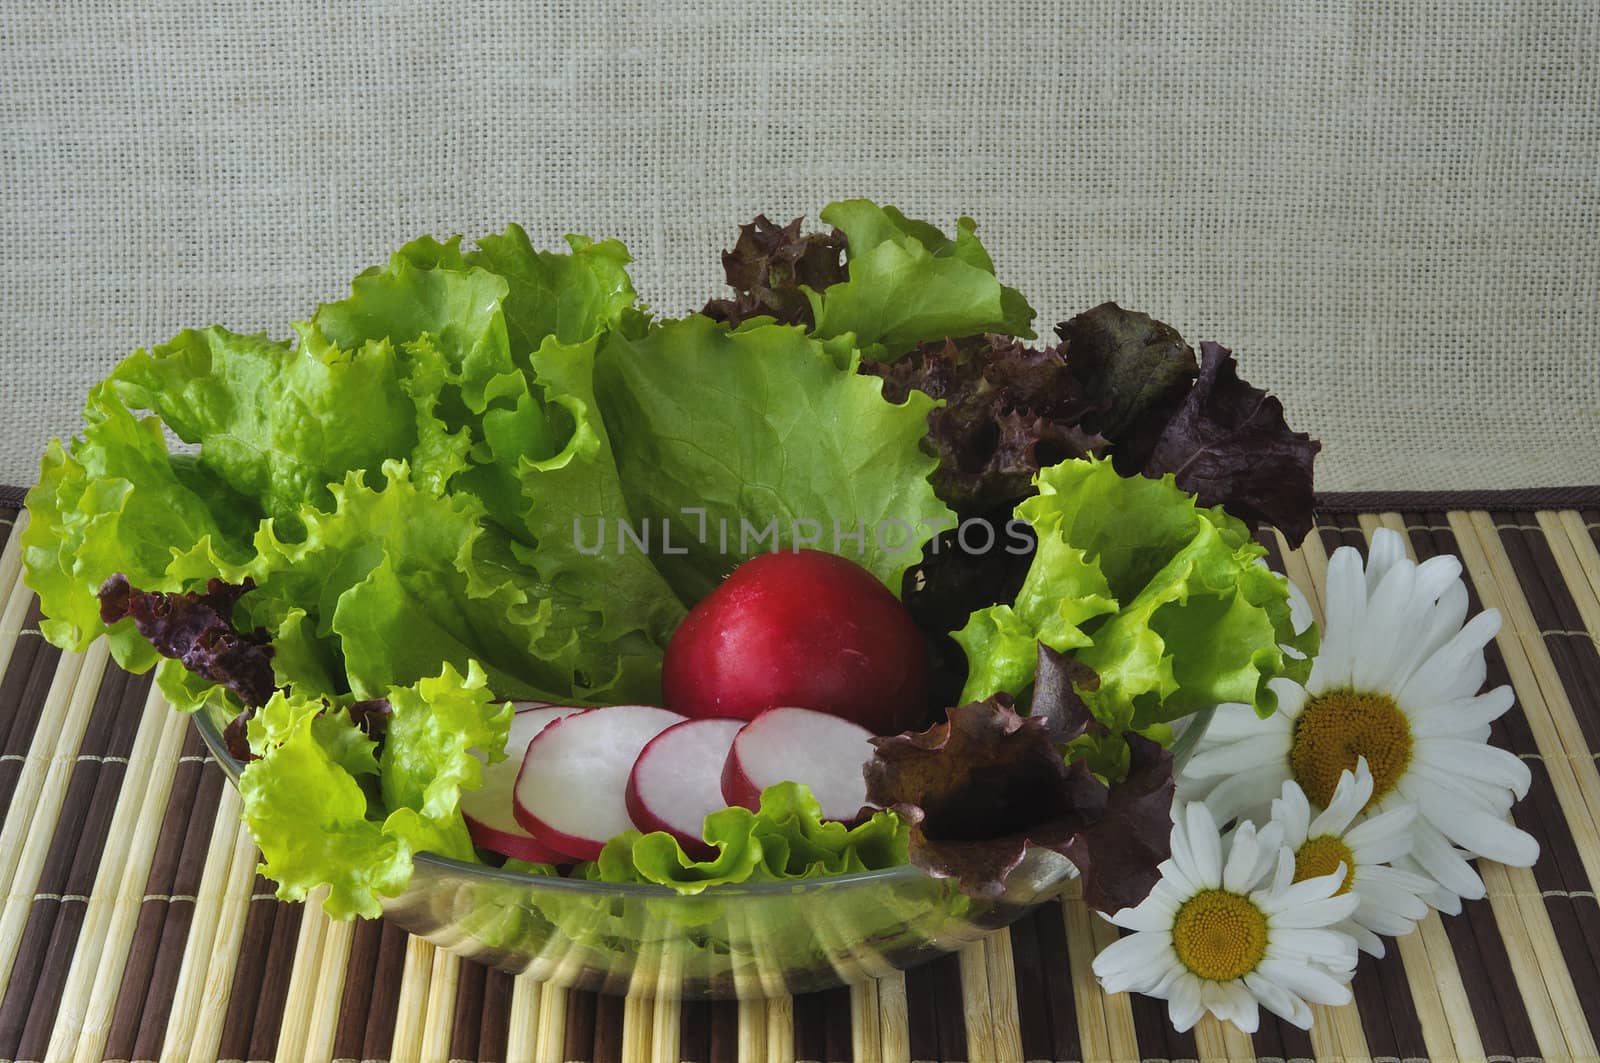 Vegetables on a glass plate and flowers
